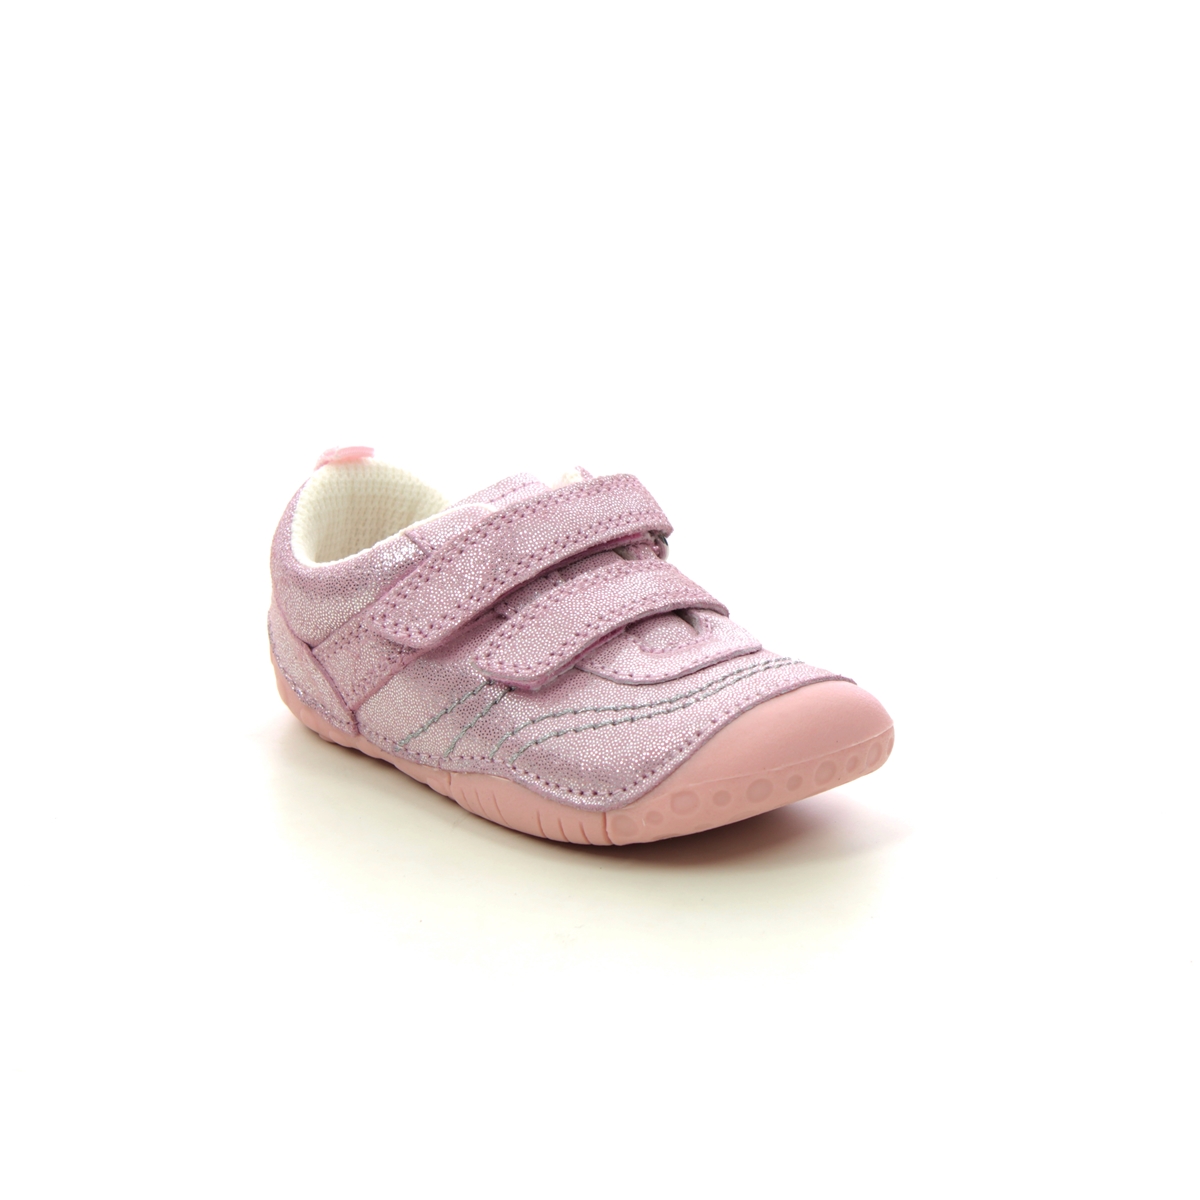 Start Rite Little Smile 2v Pink Glitter Kids girls first and baby shoes 0823-67G in a Plain  in Size 4